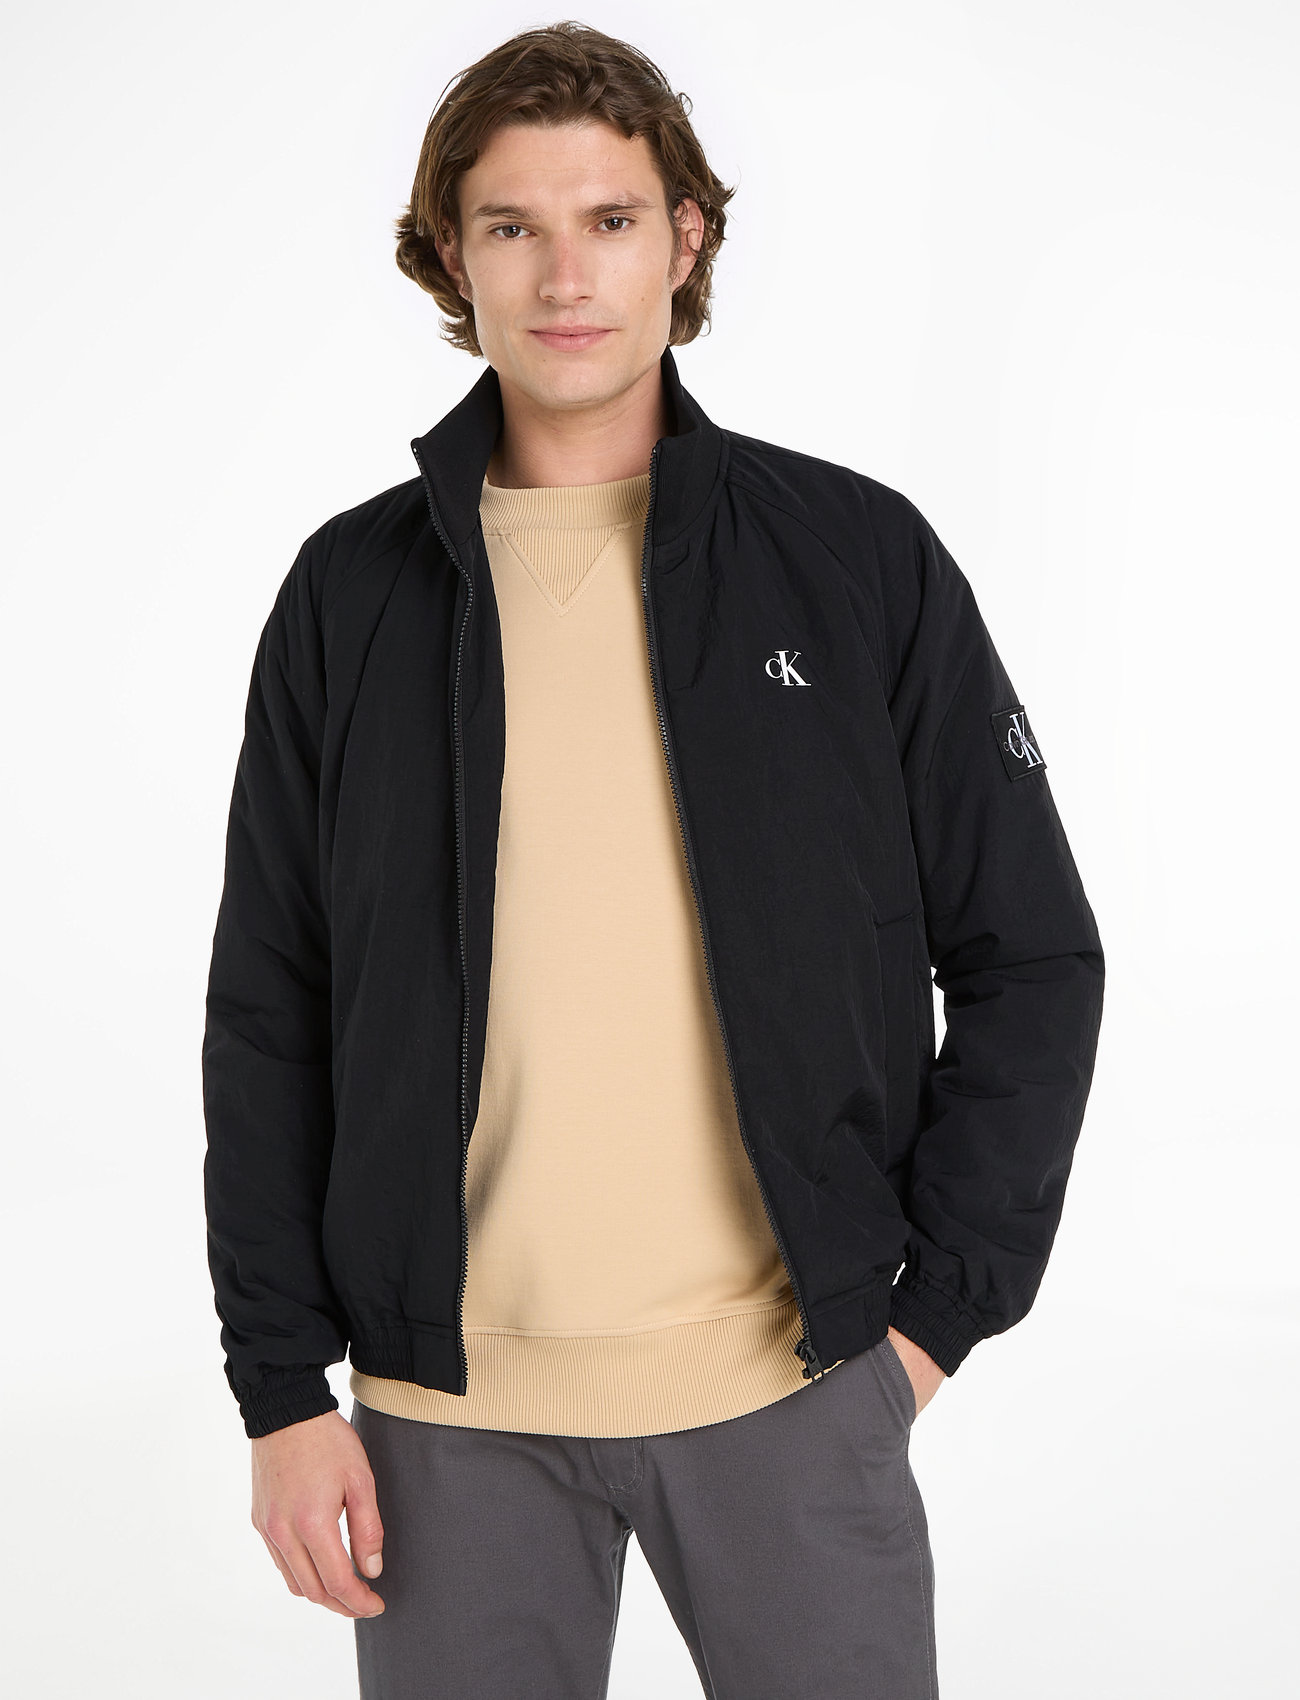 Calvin Klein Jeans Padded Harrington at Fast Klein Light from delivery Calvin €. Buy Jeans and easy online returns - Boozt.com. Jackets 127.42